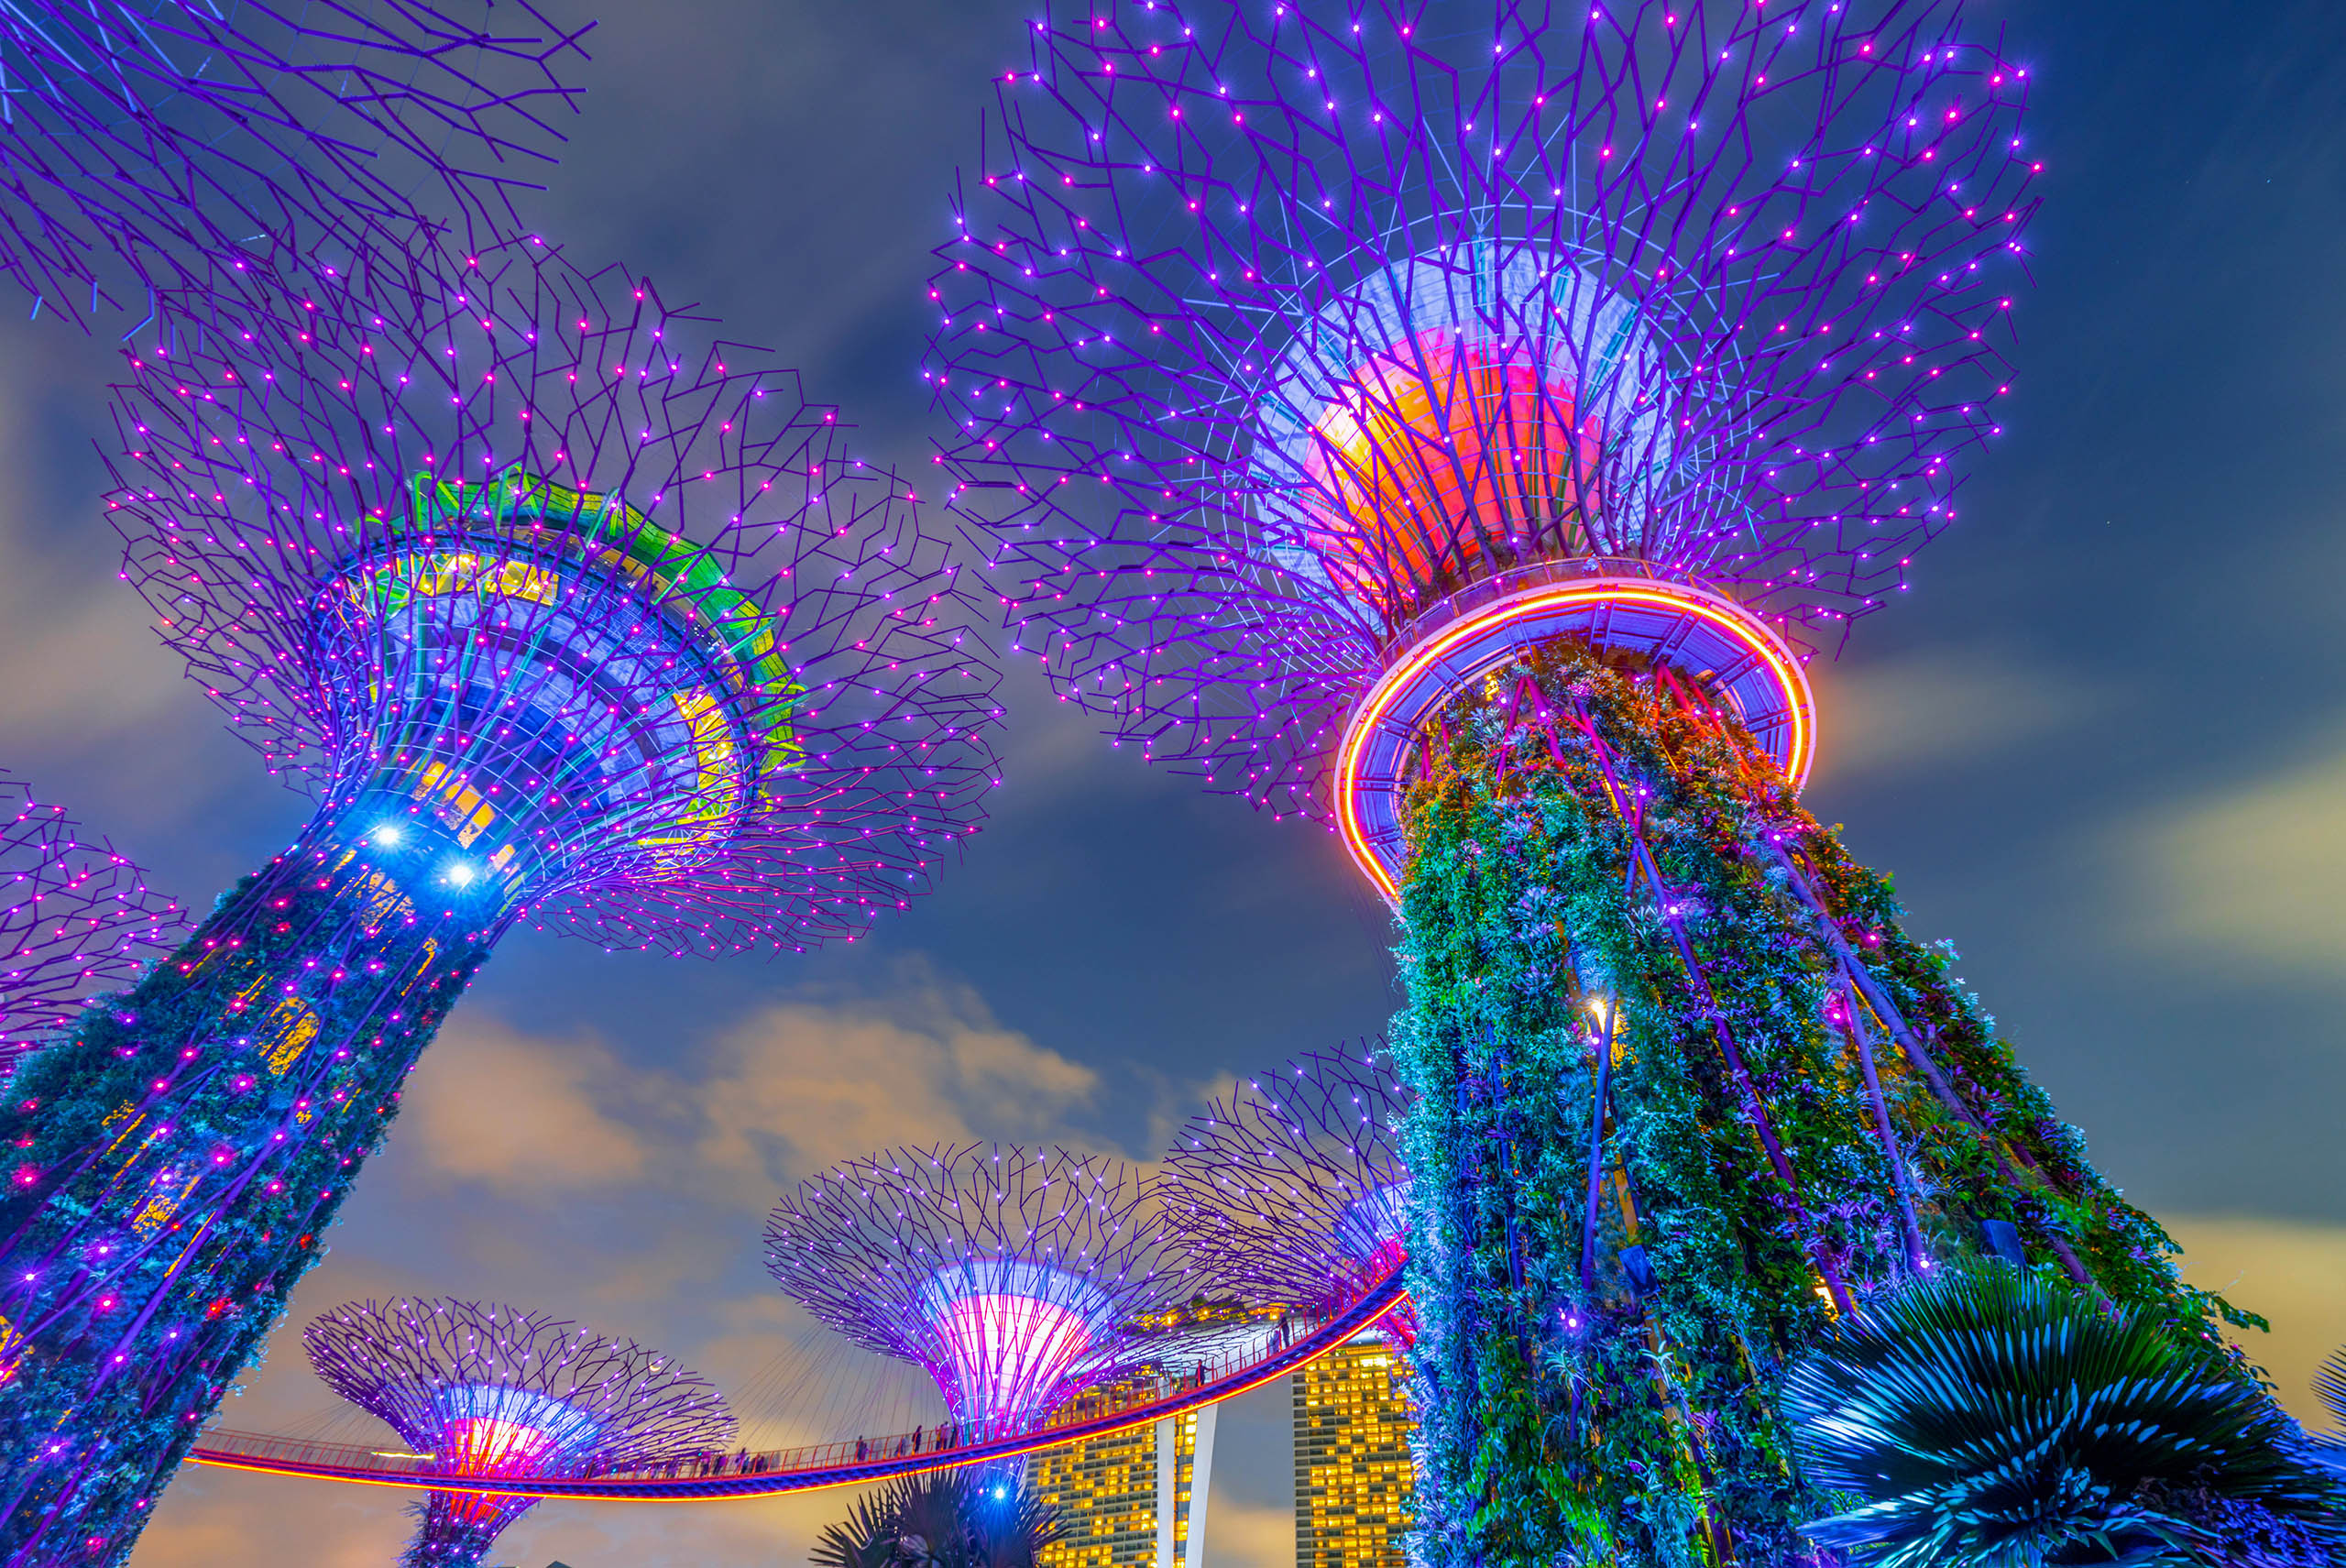 SINGAPORE - JANUARY 27, 2020: Supertrees at Gardens by the Bay. The tree structures are fitted with environmental technologies, Singapore at twilight